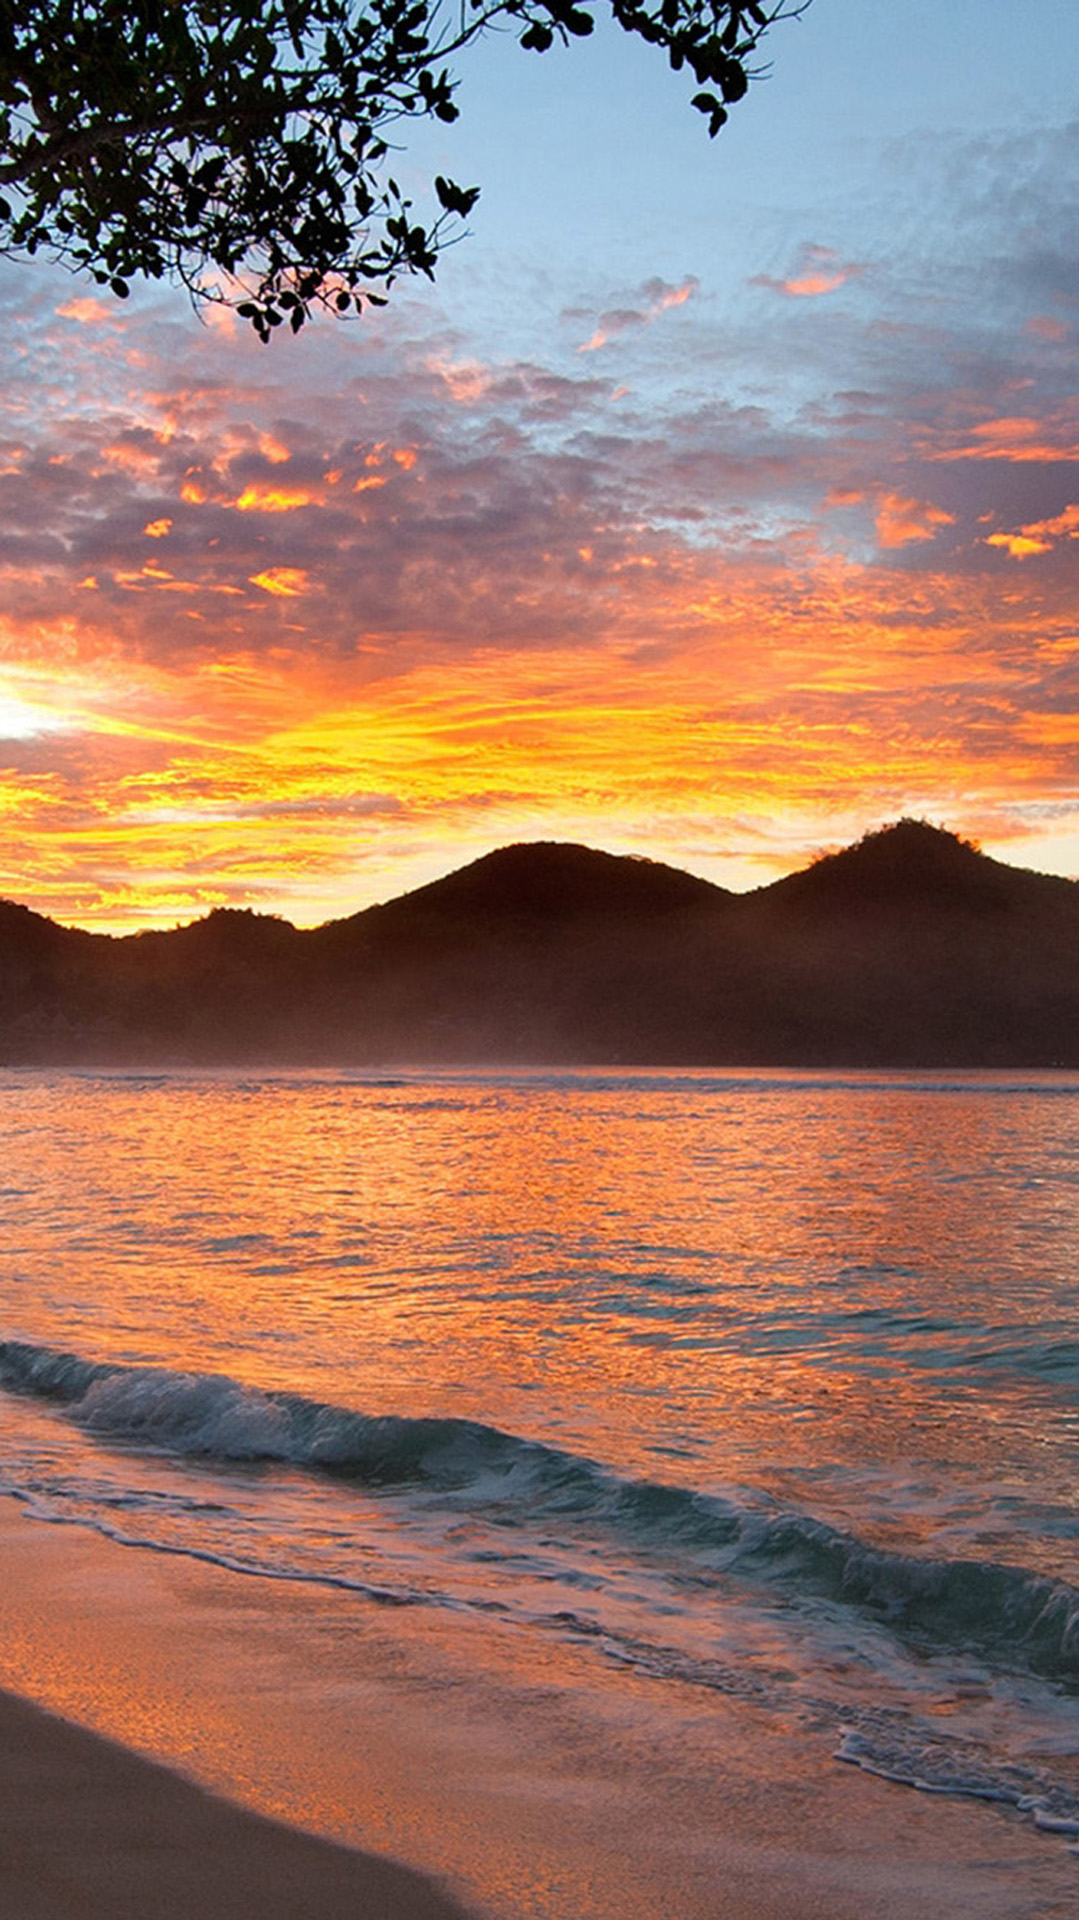 Sunset with mountains on beach